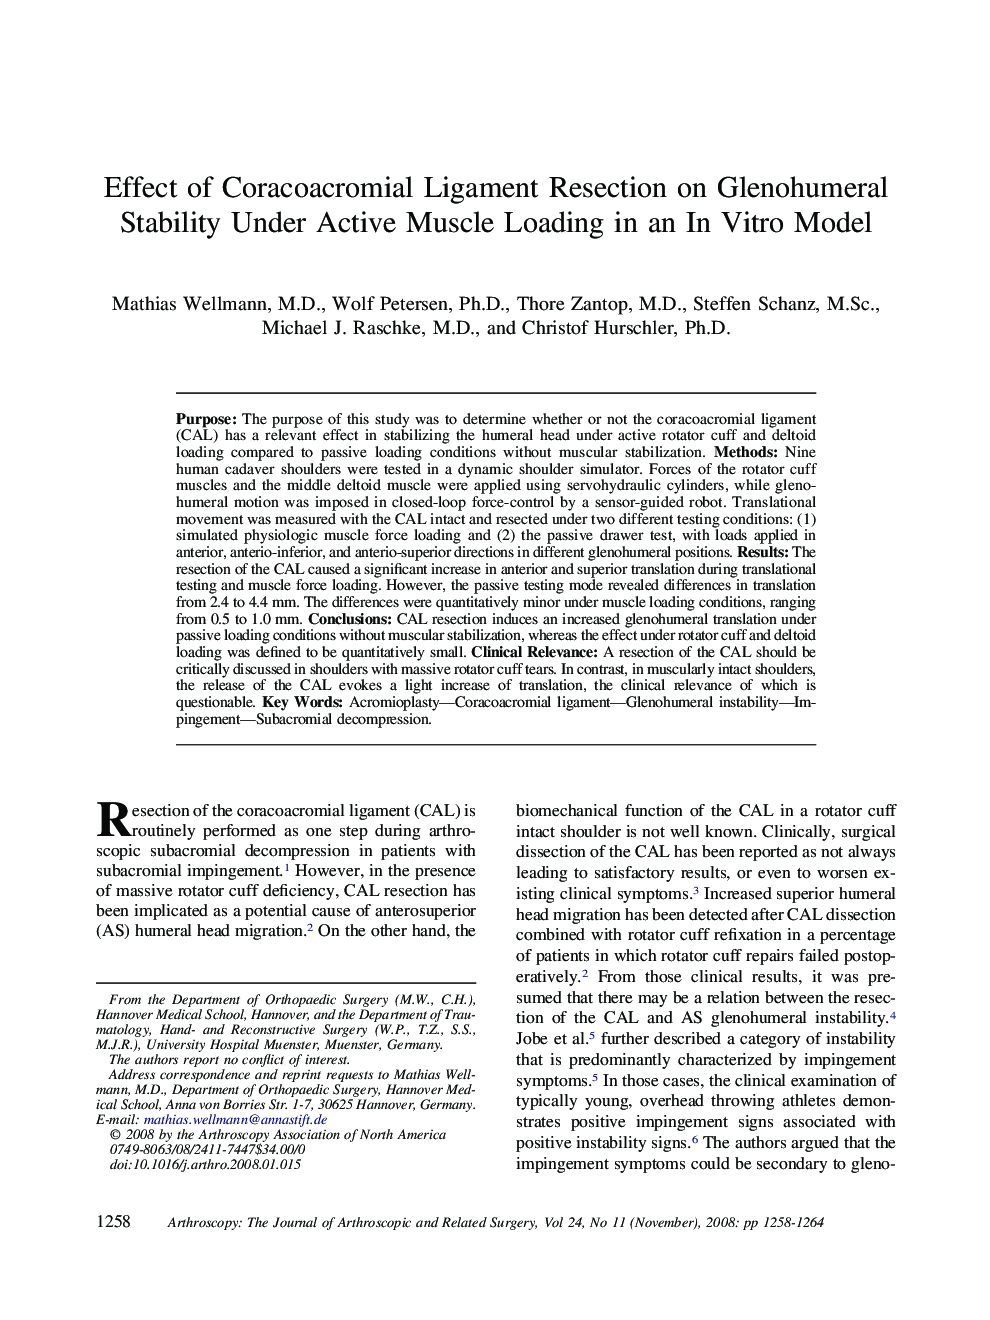 Effect of Coracoacromial Ligament Resection on Glenohumeral Stability Under Active Muscle Loading in an In Vitro Model 